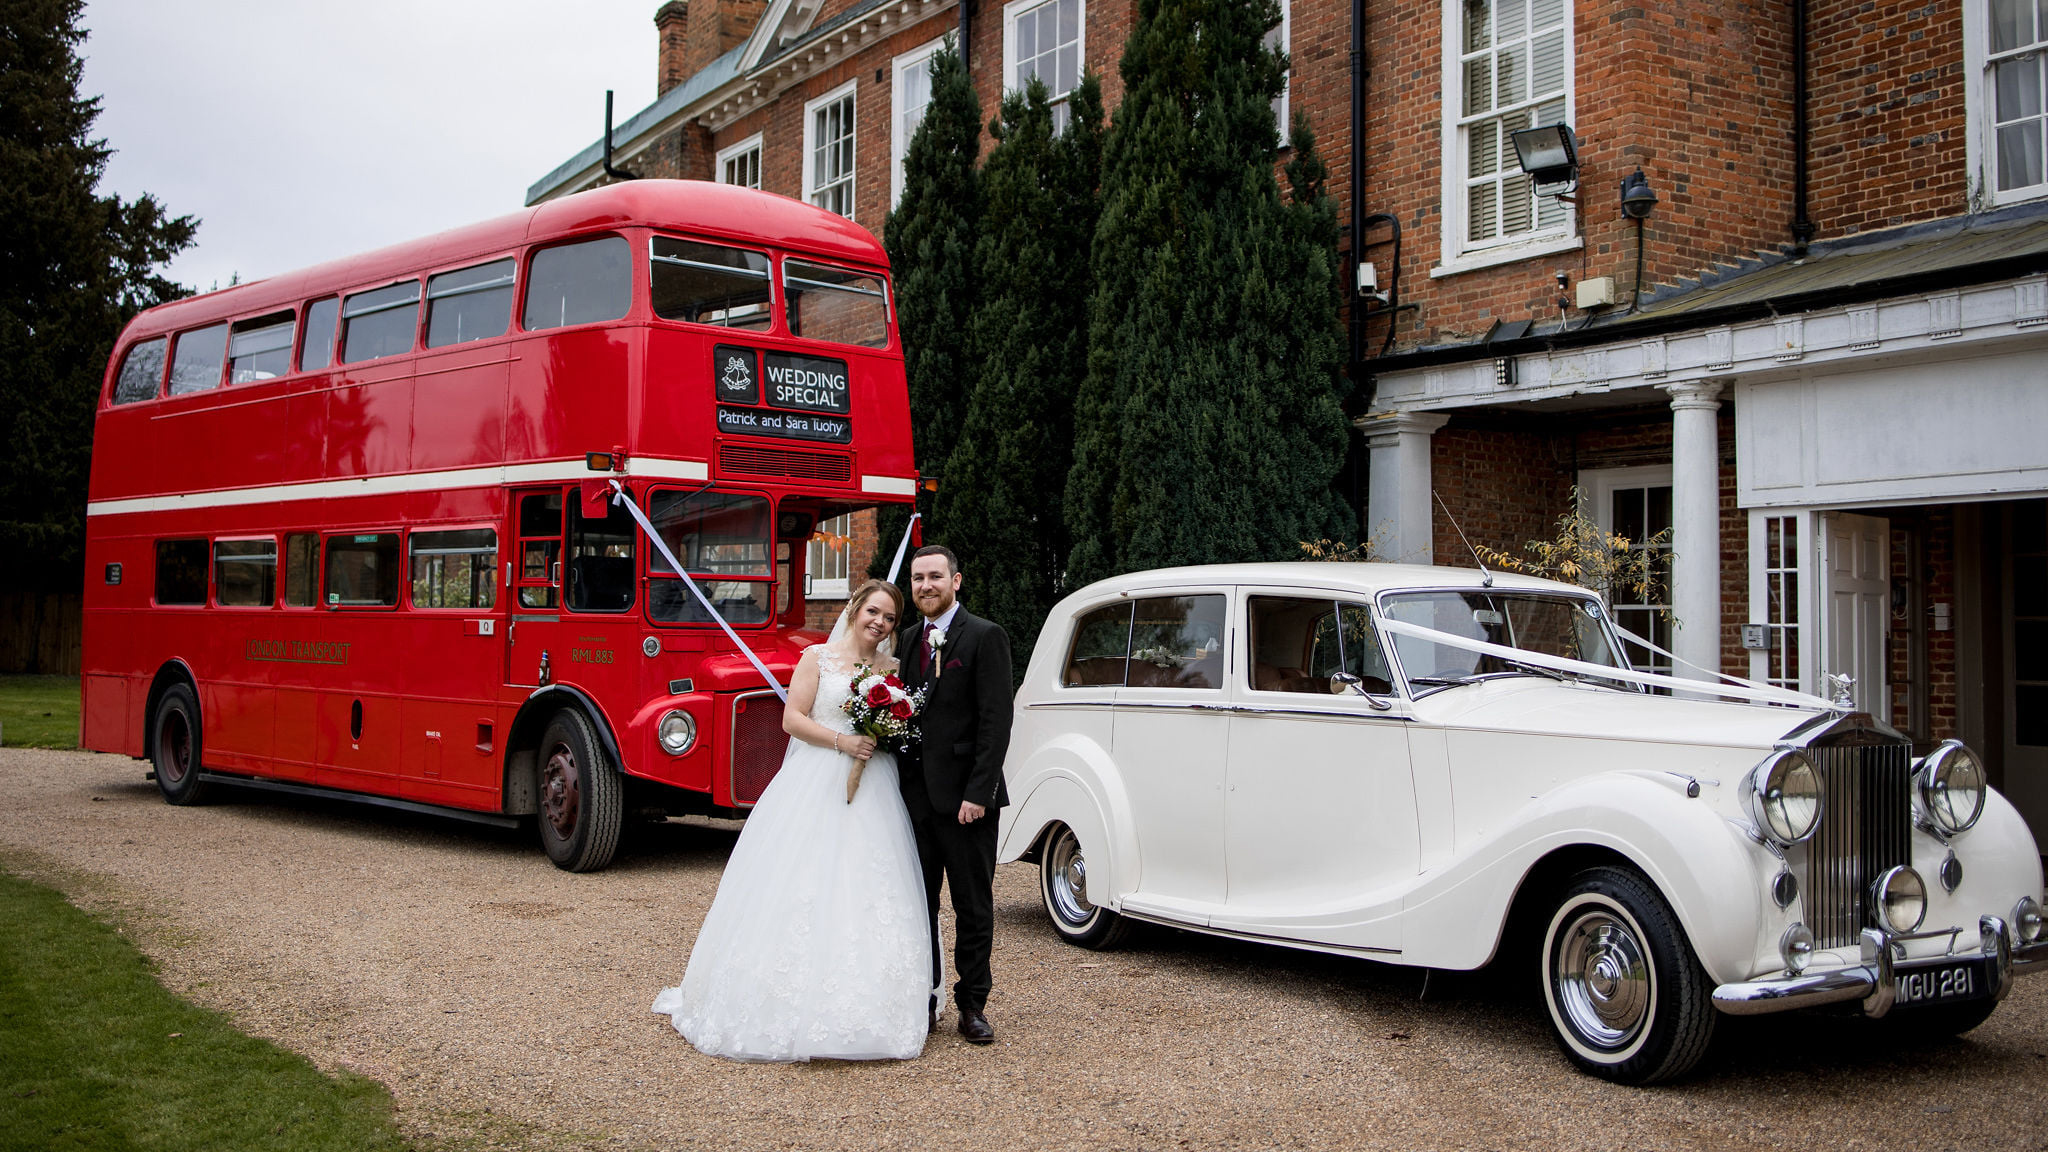 Classic Rolls-Royce followed by a large double decker red bus in front of a wedding venue in Egham